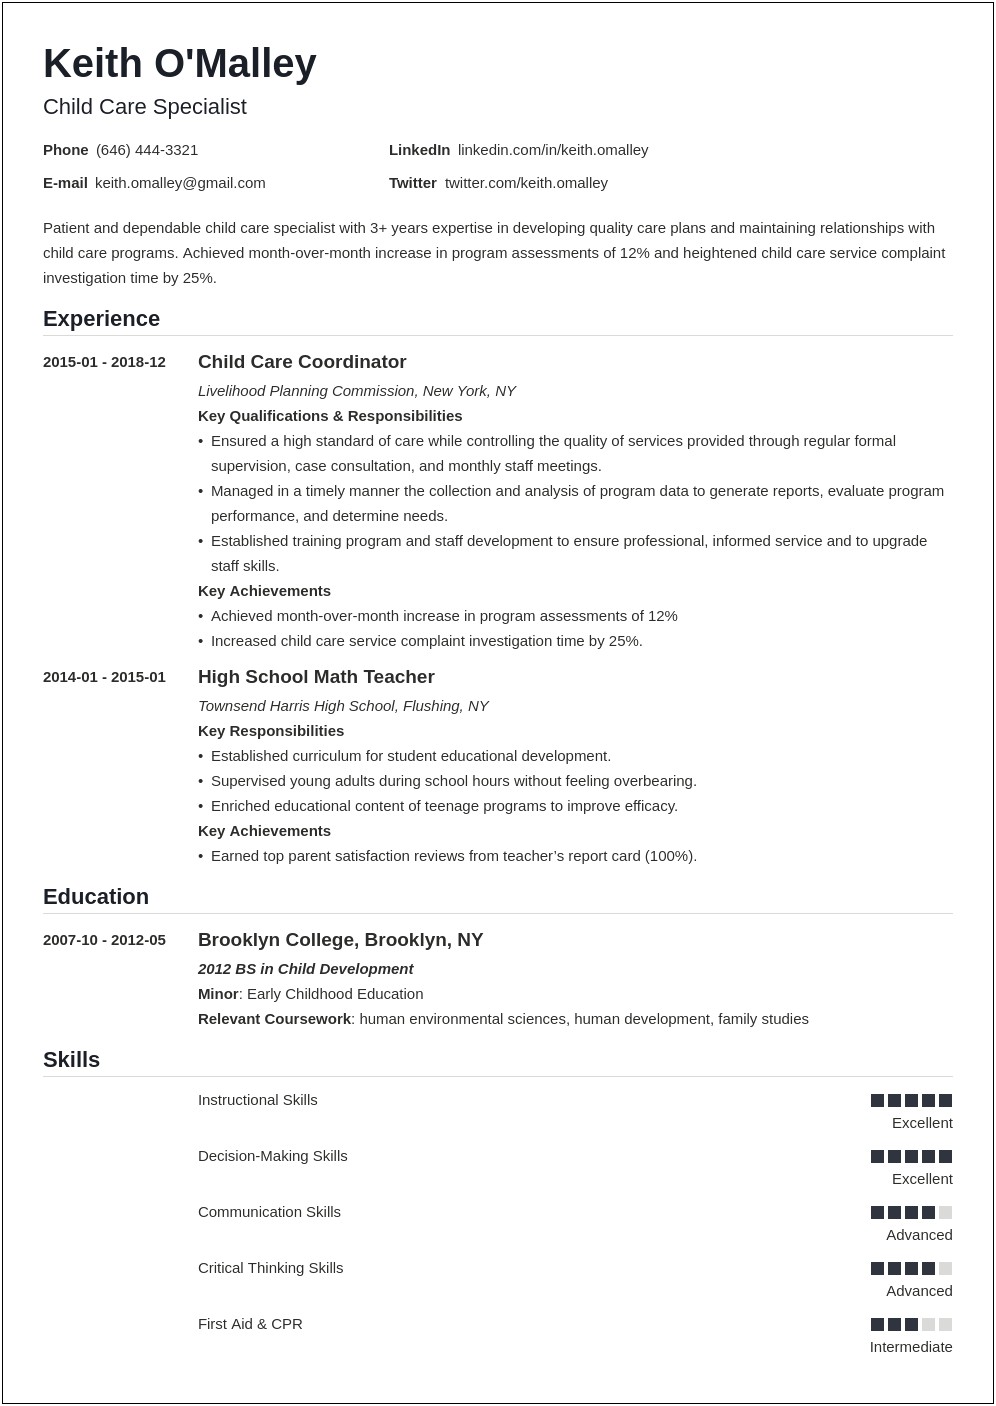 Resume Career Objective Examples Early Childhood Education